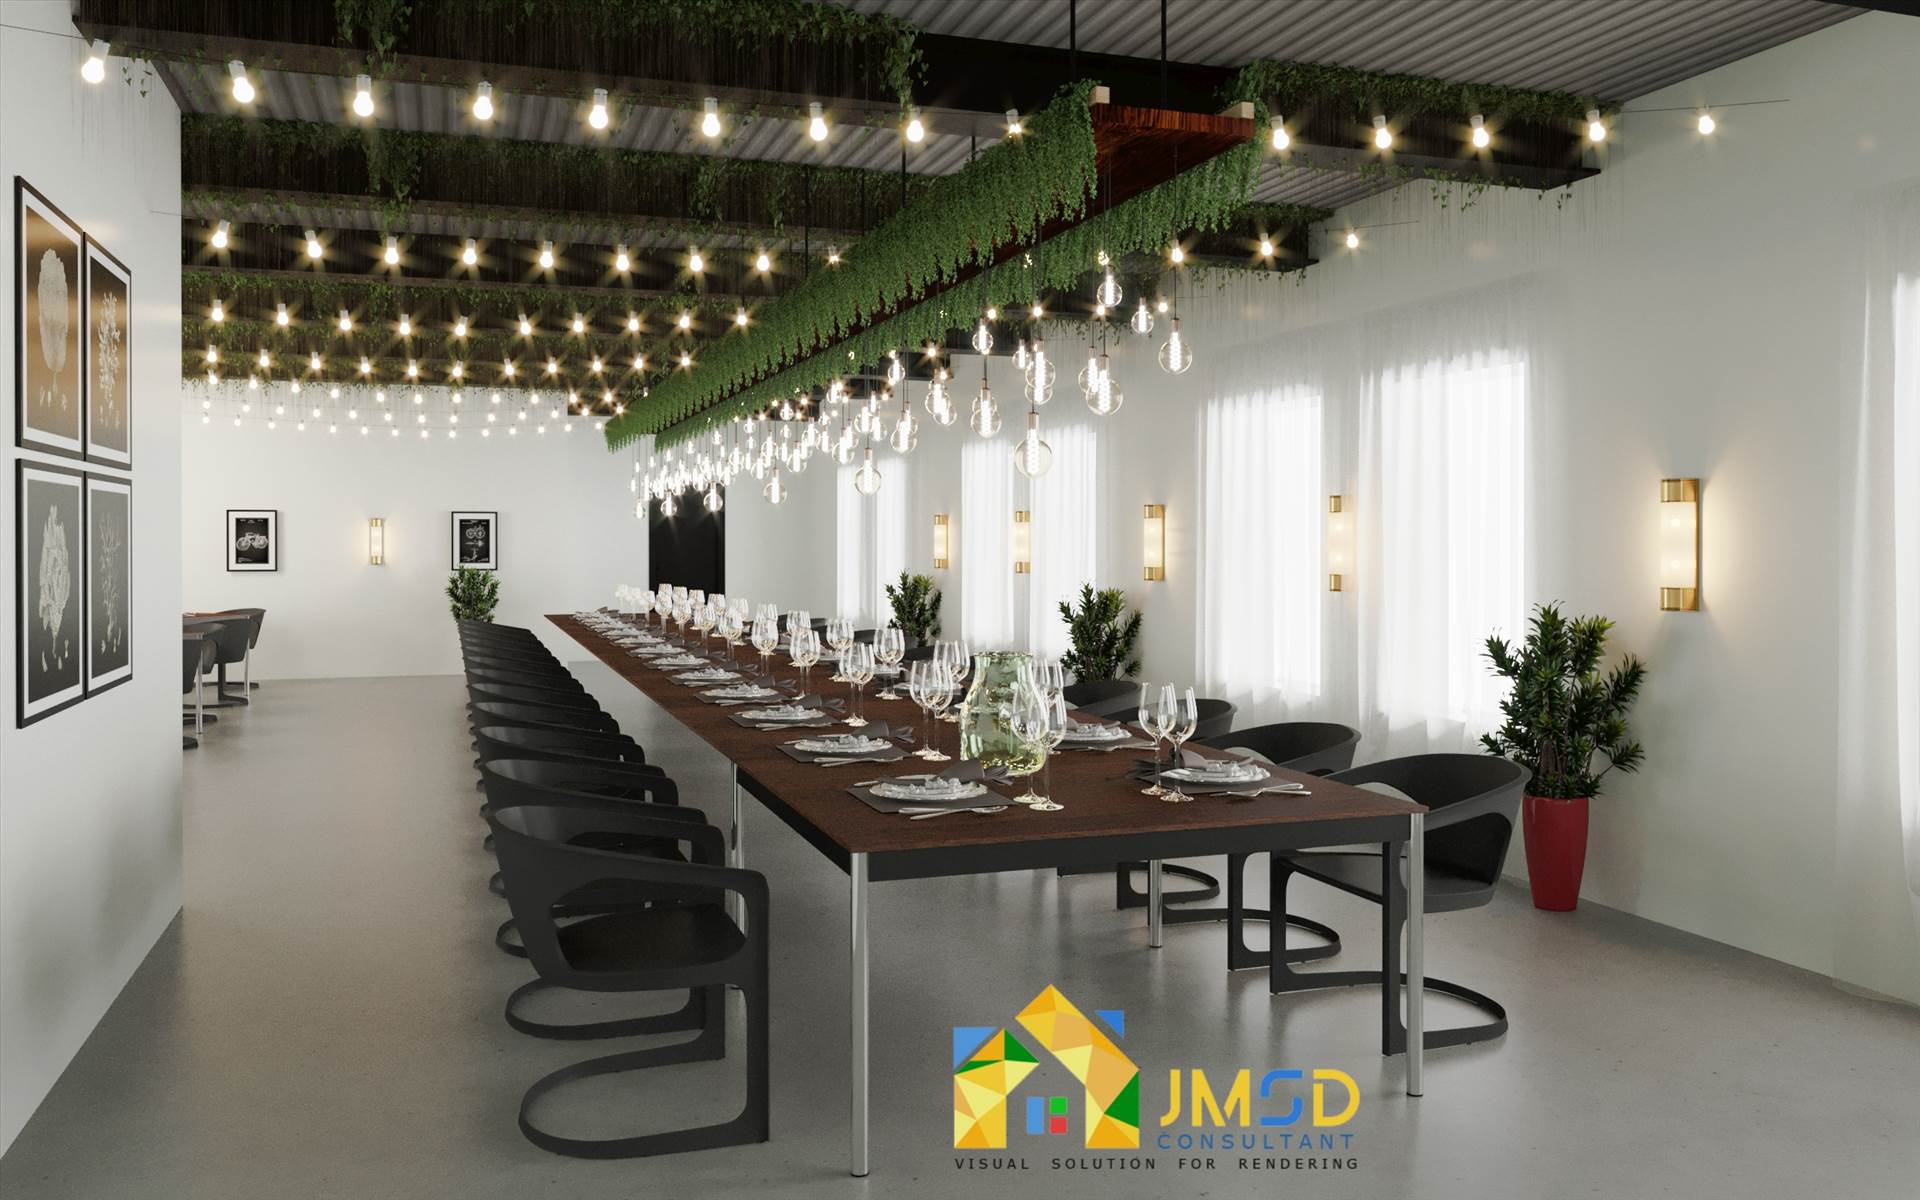 3D Rendering for Event Hall Space in Warren Michigan This Project is use for Event Space planners and Designers in Warren Michigan . You can visualize your entire event using 3D models of furniture, decor, flowers, and more, all within renderings of your venue. by JMSDCONSULTANT